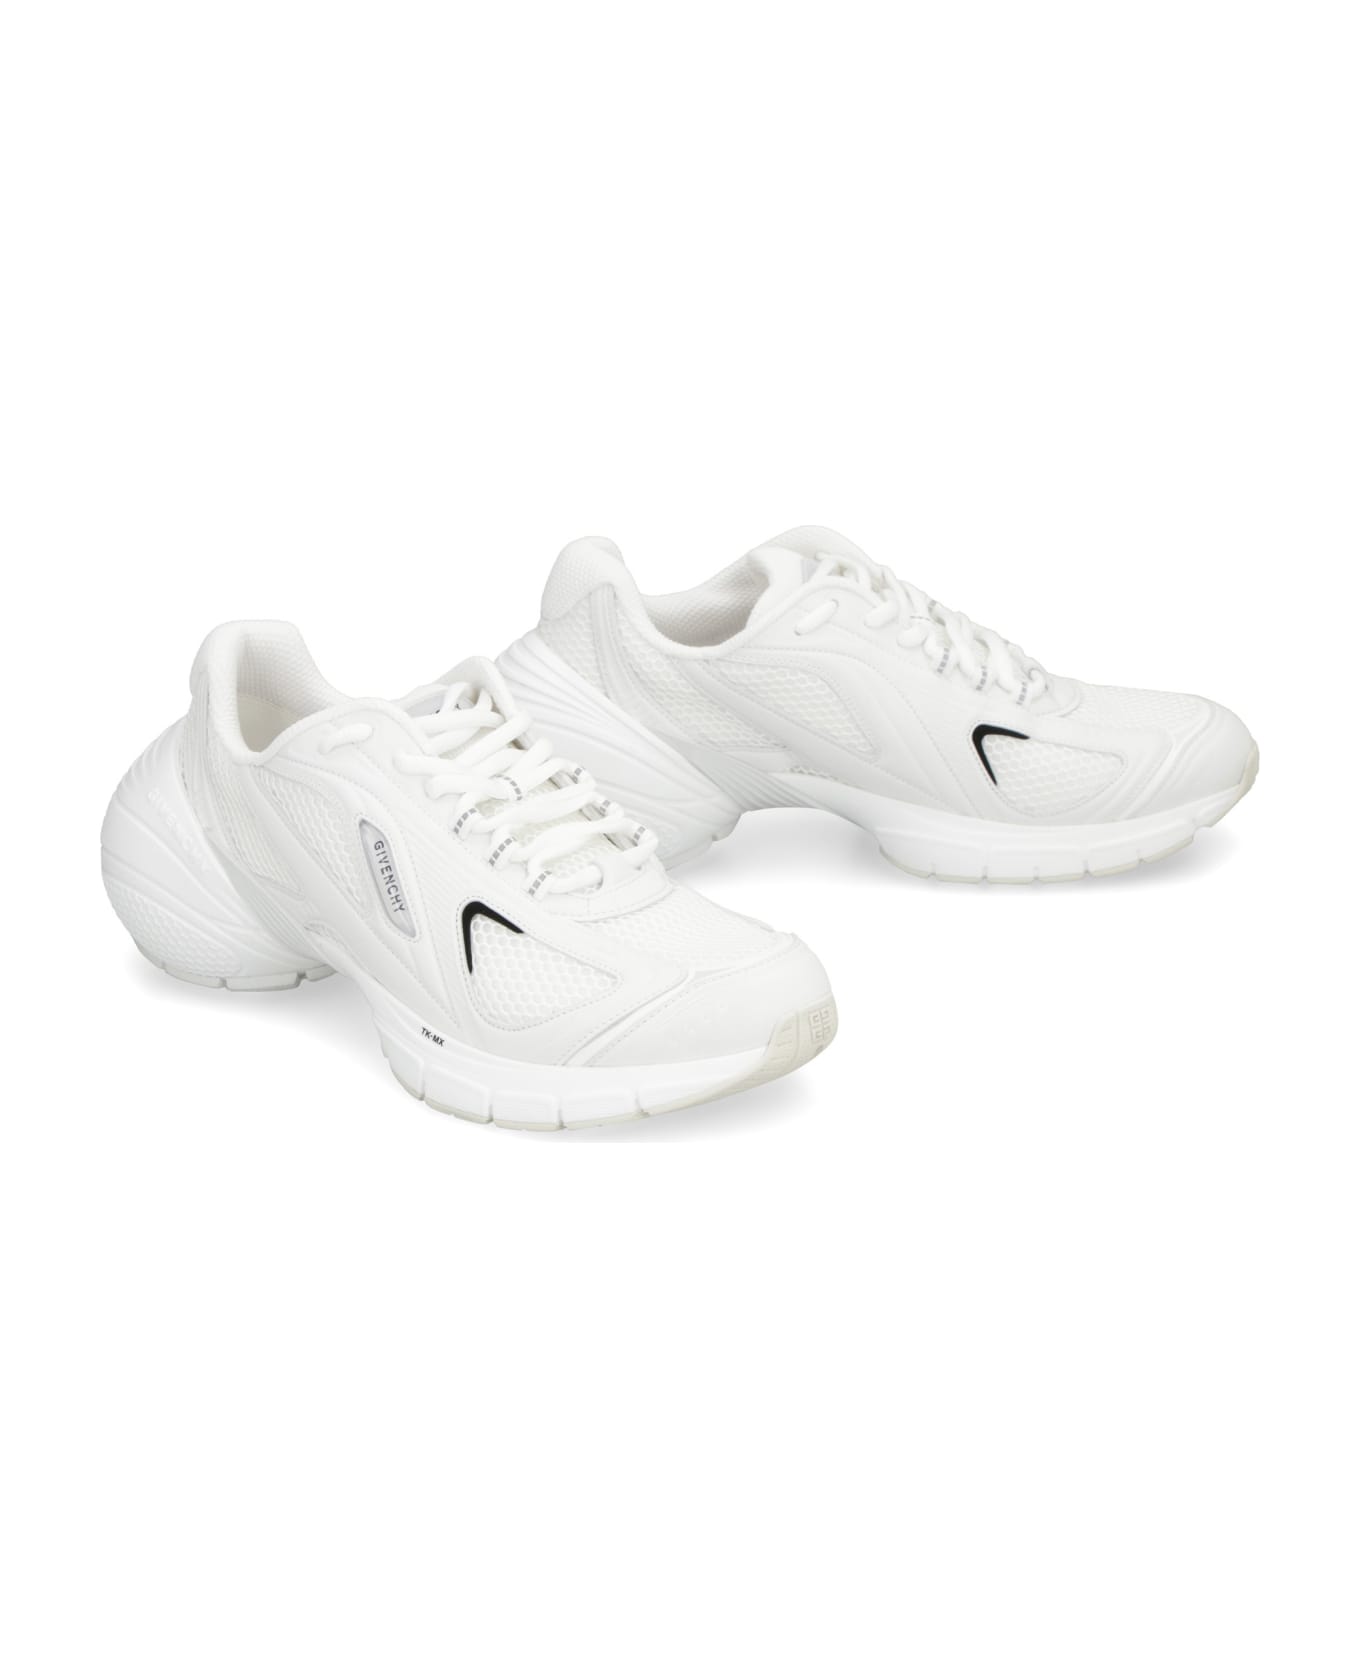 Givenchy Tk-mx Low-top Sneakers - White